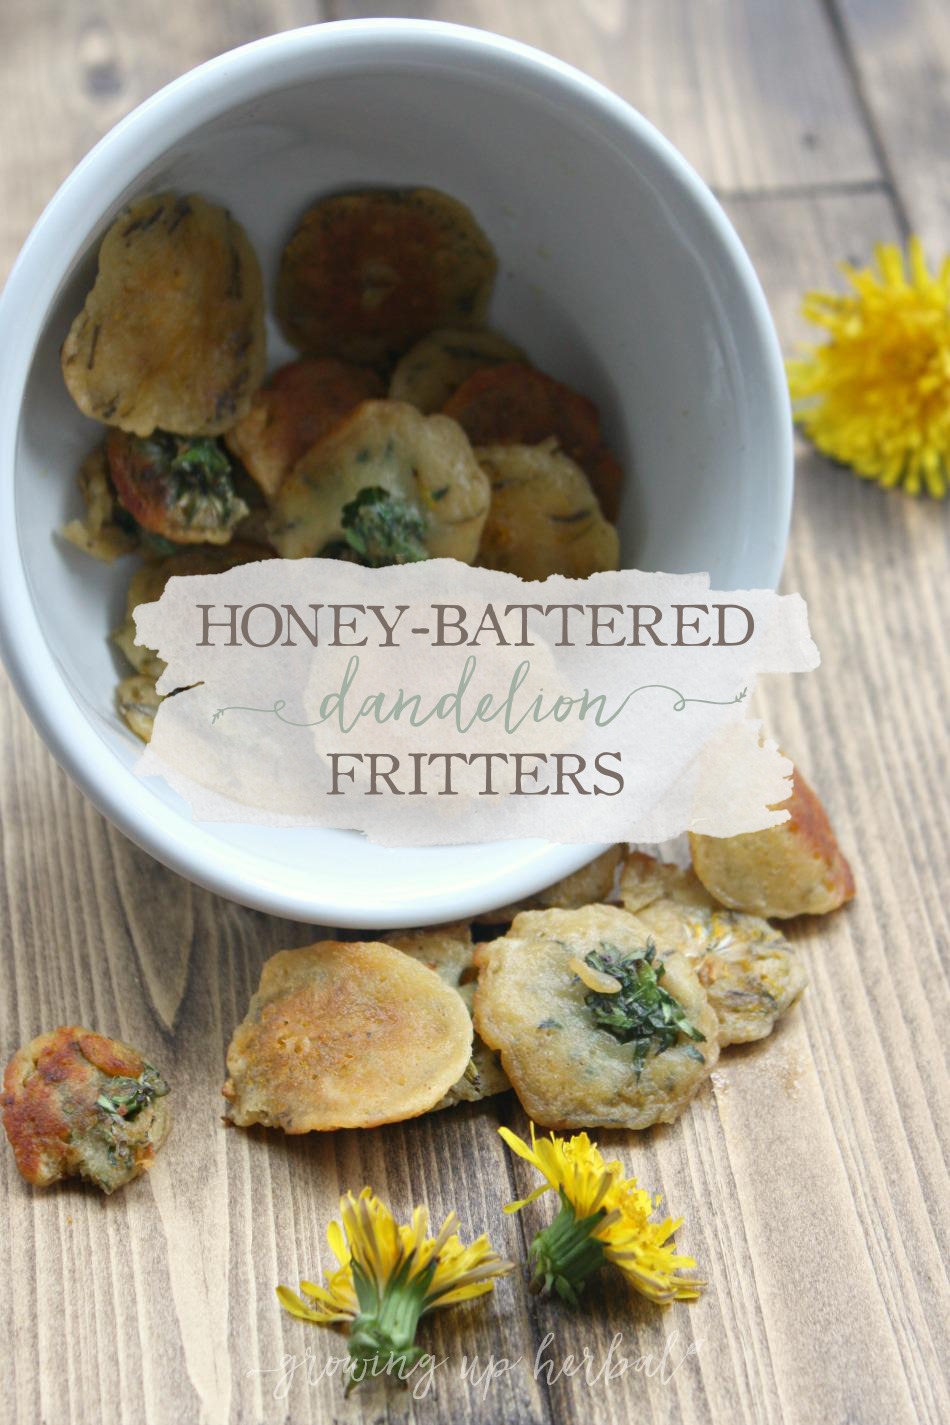 Honey-Battered Dandelion Fritters | Growing Up Herbal | Enjoy some of spring's goodness. Eat wild dandelion flowers in my version of this most famous recipe.